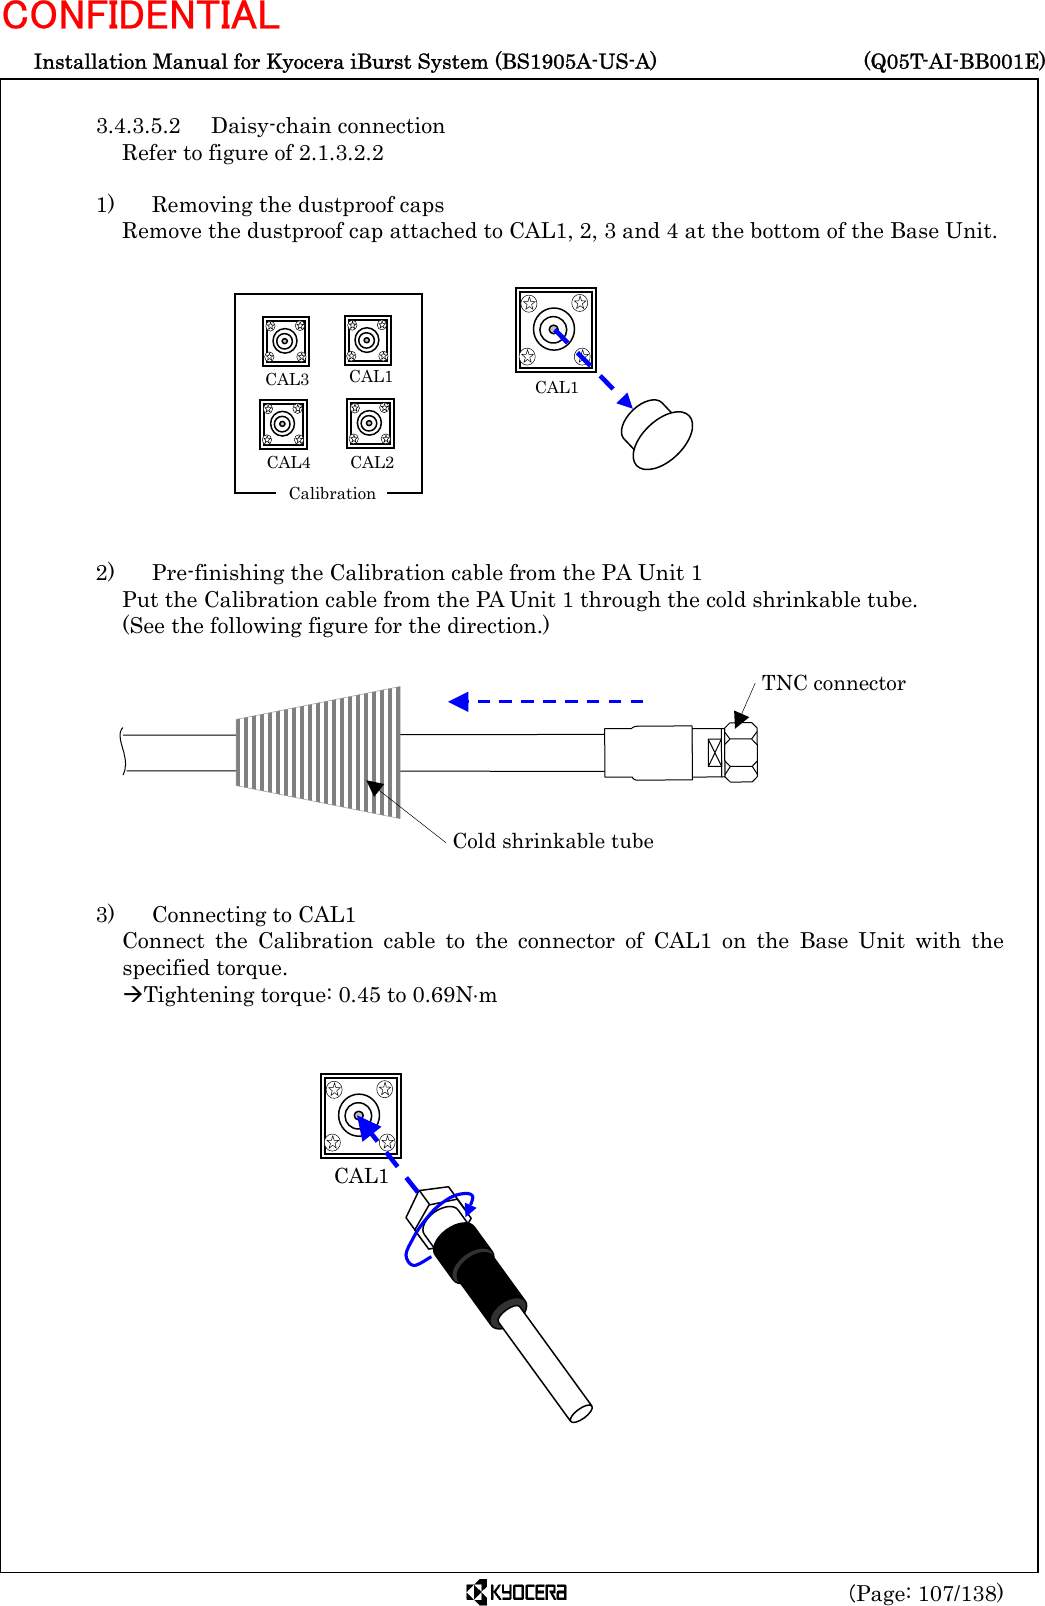  Installation Manual for Kyocera iBurst System (BS1905A-US-A)     (Q05T-AI-BB001E) (Page: 107/138) CONFIDENTIAL  3.4.3.5.2 Daisy-chain connection Refer to figure of 2.1.3.2.2  1)    Removing the dustproof caps Remove the dustproof cap attached to CAL1, 2, 3 and 4 at the bottom of the Base Unit.             2)    Pre-finishing the Calibration cable from the PA Unit 1 Put the Calibration cable from the PA Unit 1 through the cold shrinkable tube.   (See the following figure for the direction.)           3)   Connecting to CAL1 Connect the Calibration cable to the connector of CAL1 on the Base Unit with the specified torque. ÆTightening torque: 0.45 to 0.69N⋅m          CAL1  Cold shrinkable tube TNC connector  CAL1CAL1CAL2  CAL3 CAL4   Calibration 